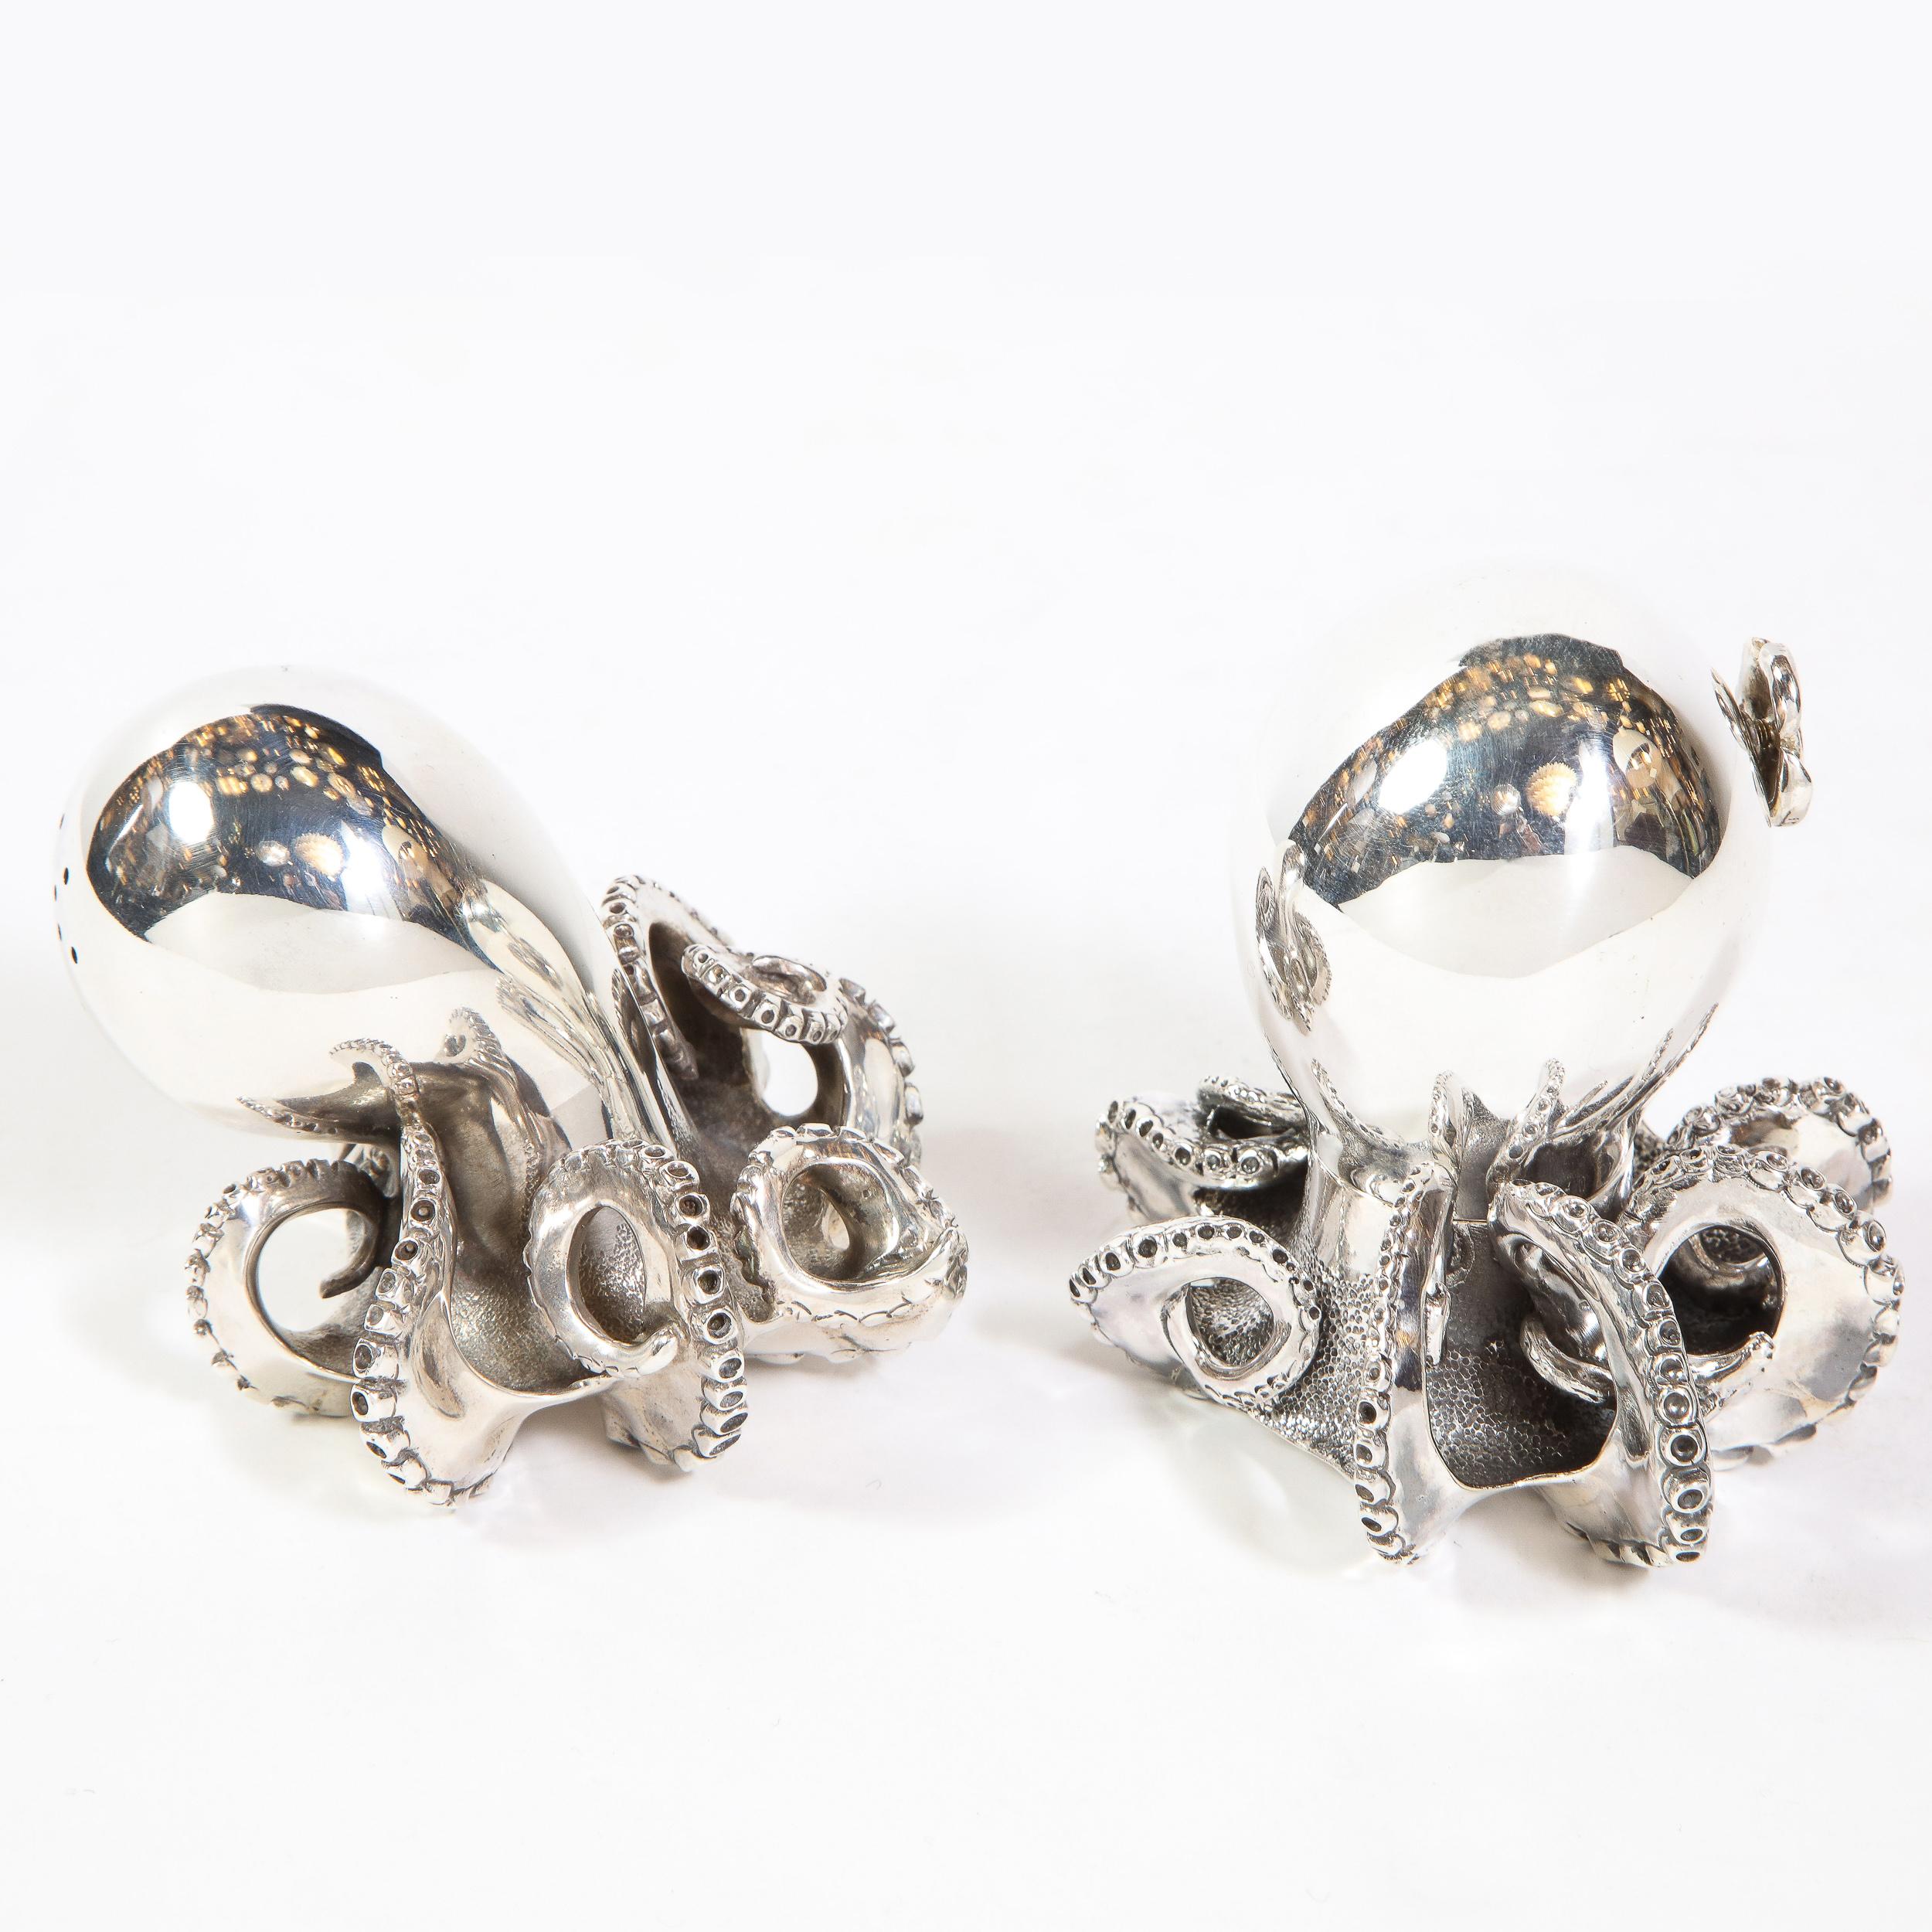 Handcrafted Sterling Silver Octopus Salt Shaker and Pepper Mill by Missiaglia 2